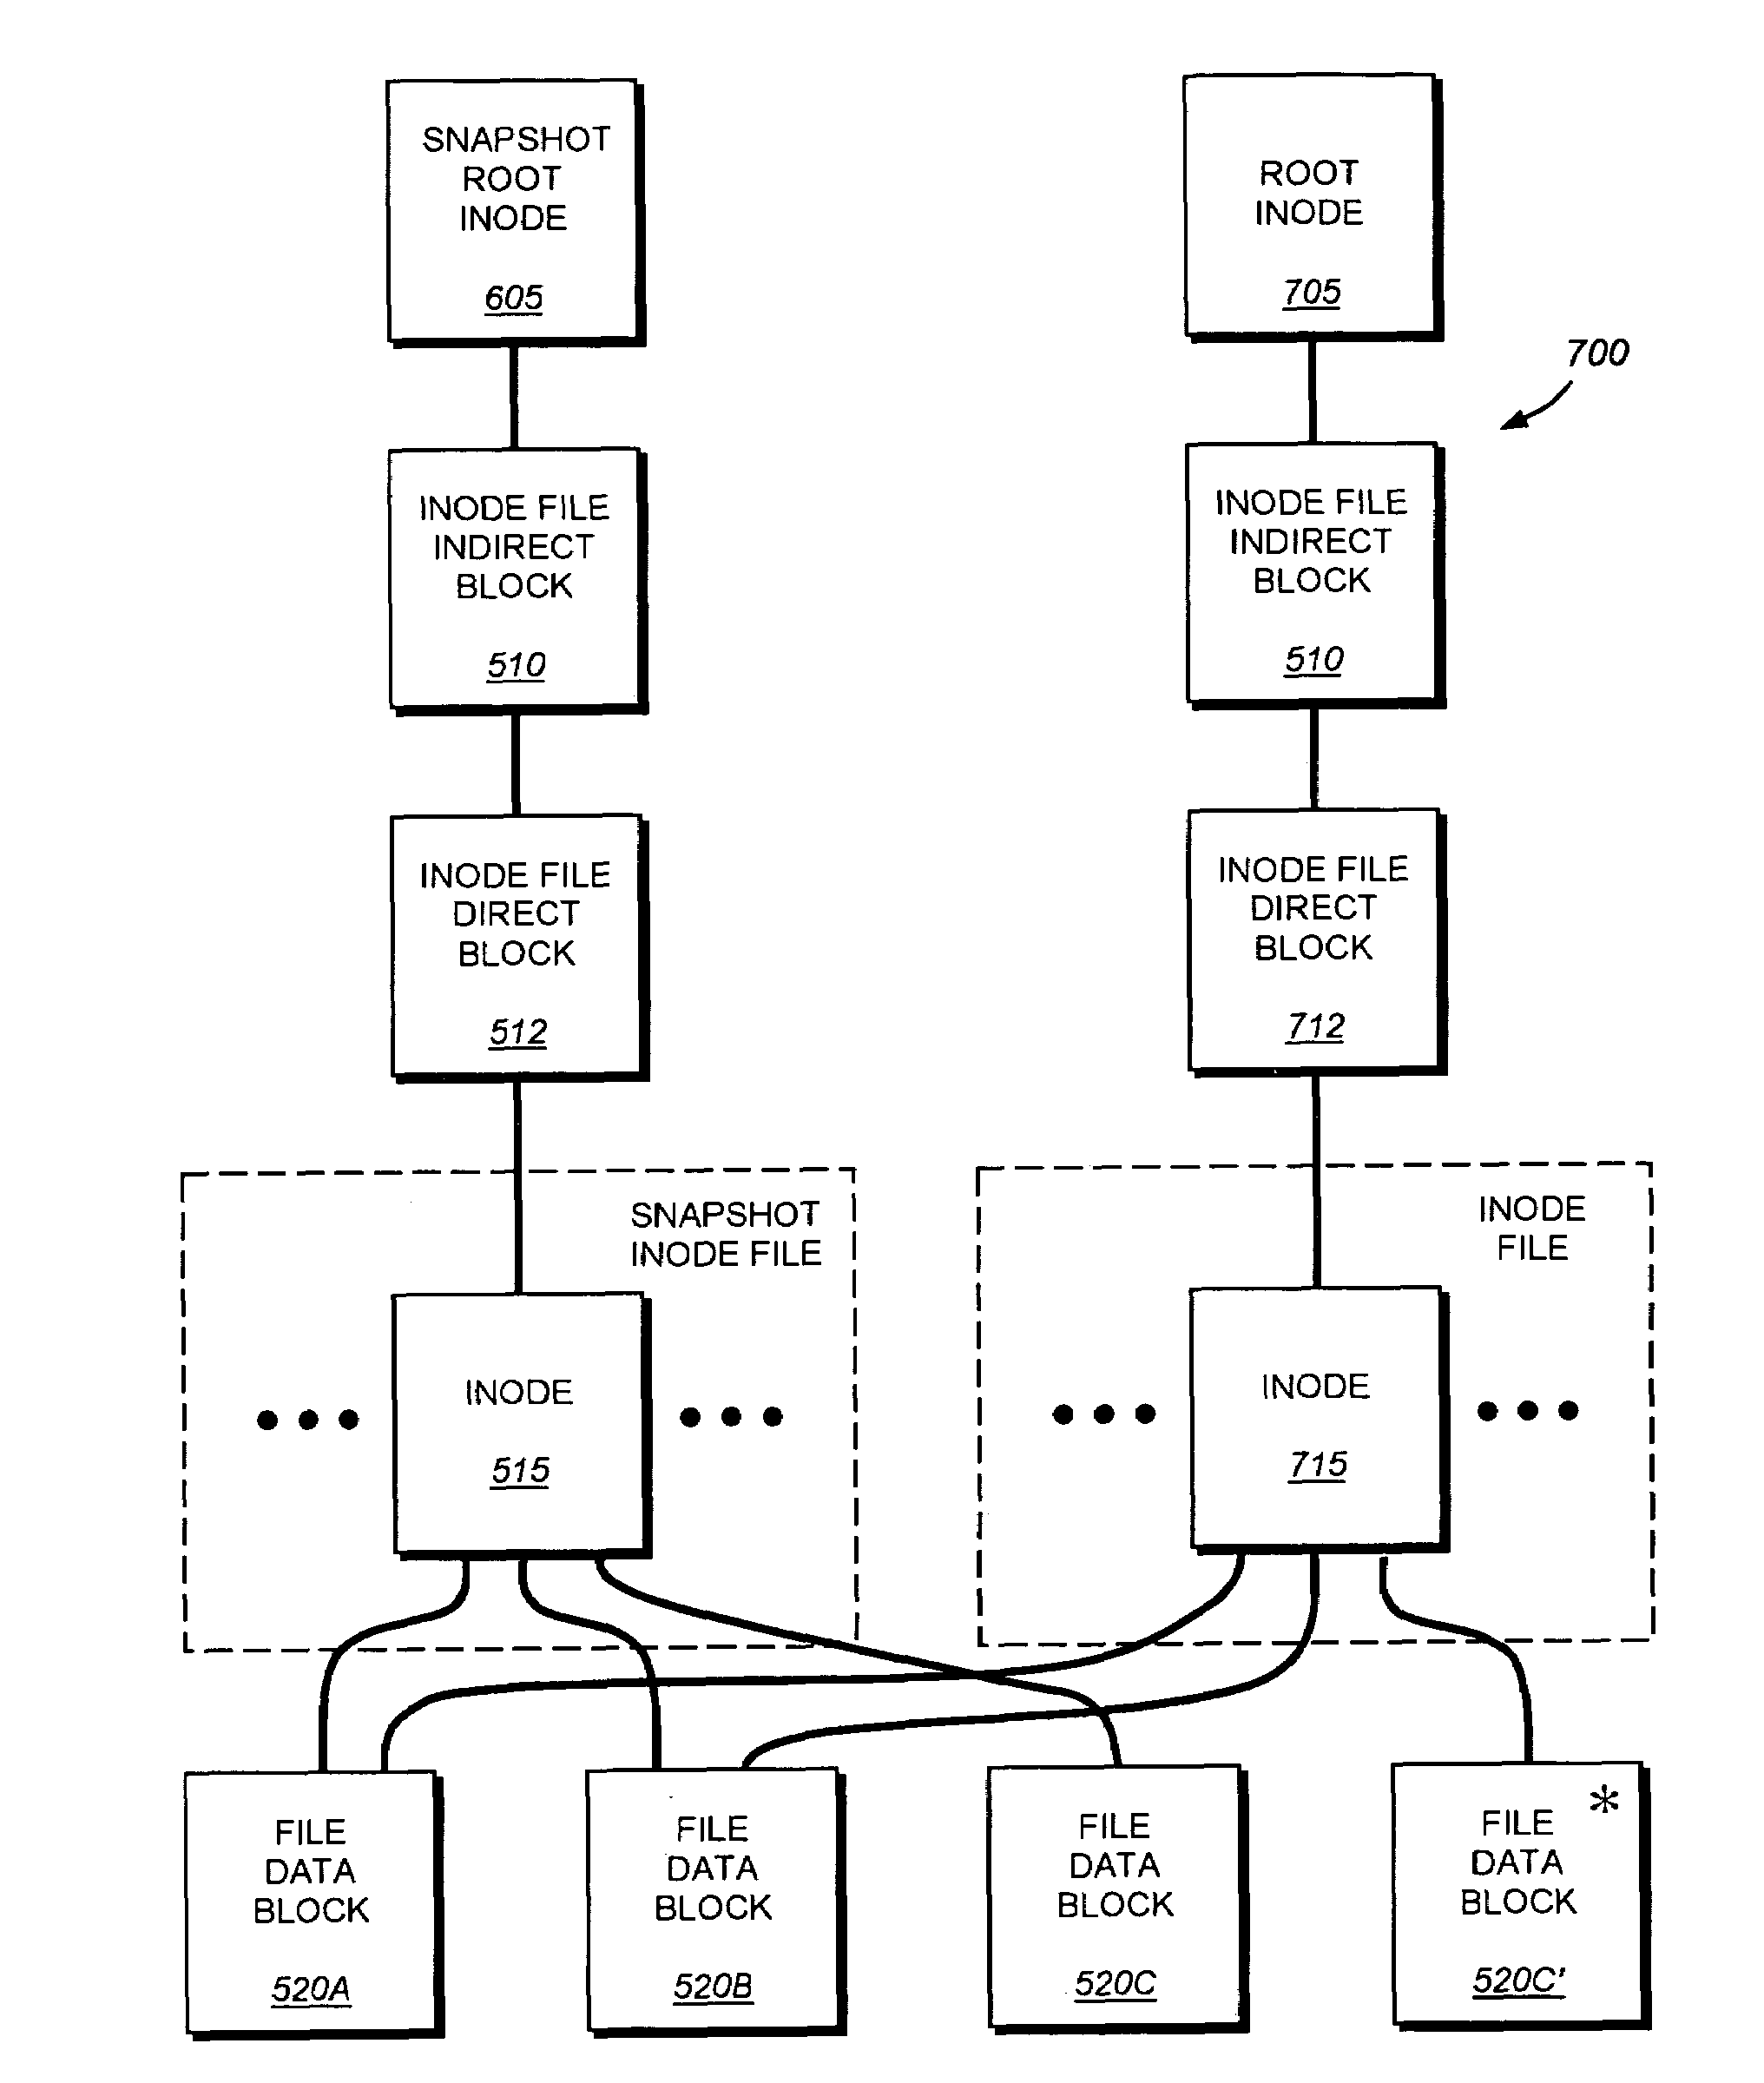 System and method for determining changes in two snapshots and for transmitting changes to a destination snapshot